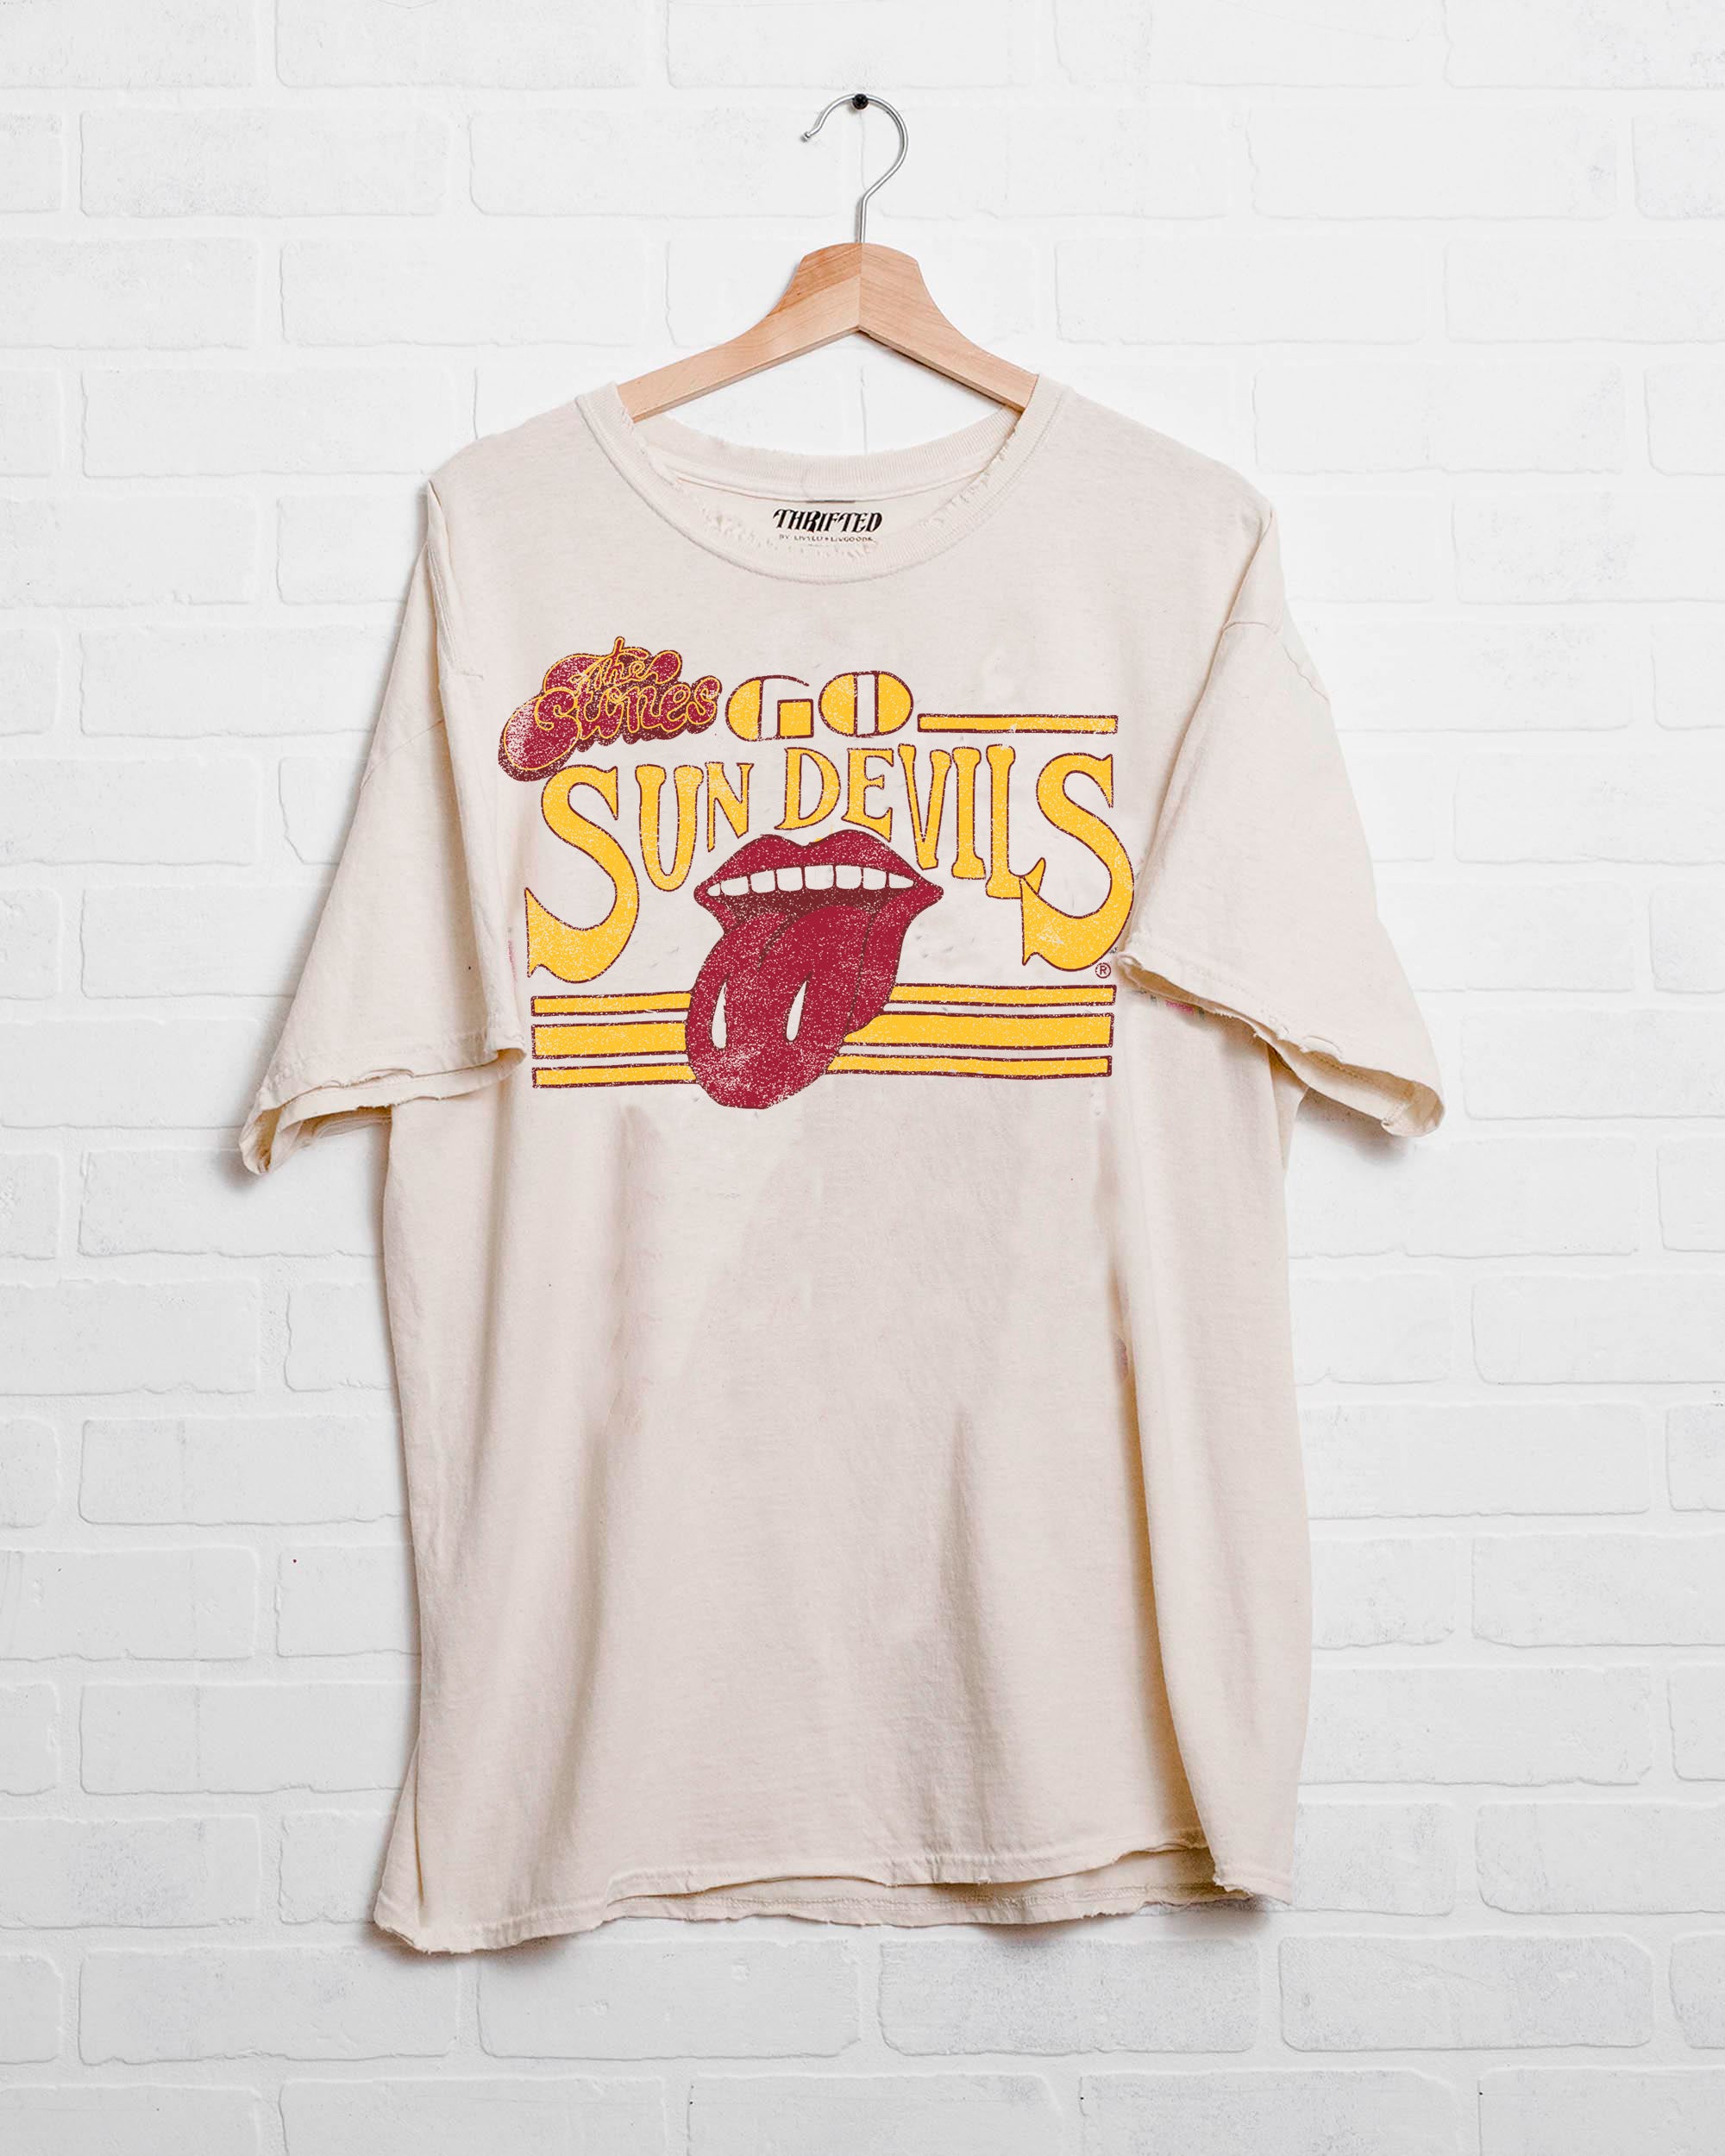 Rolling Stones Sun Devils Stoned Off White Thrifted Tee - shoplivylu